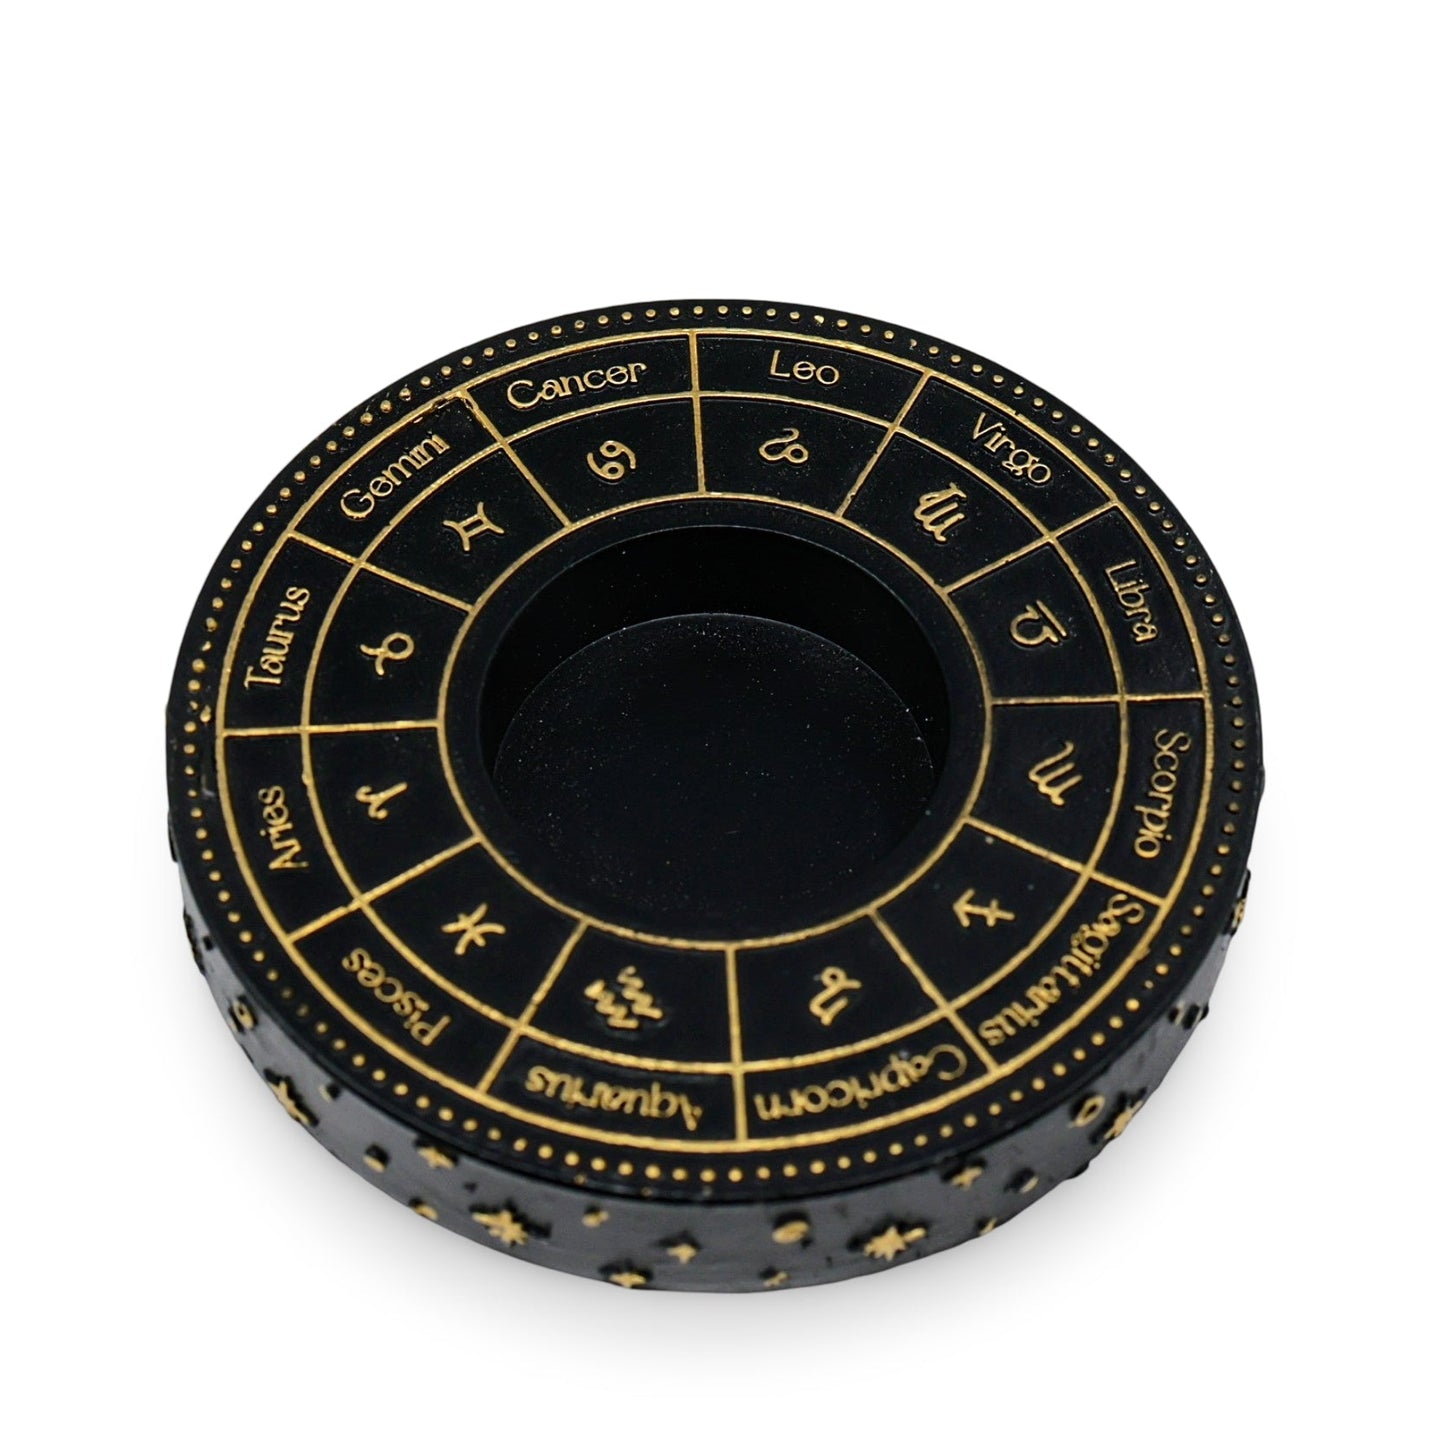 Astrology Wheel Zodiac Candle Holder for Tealight, featuring intricate gold-effect detailing of zodiac signs.